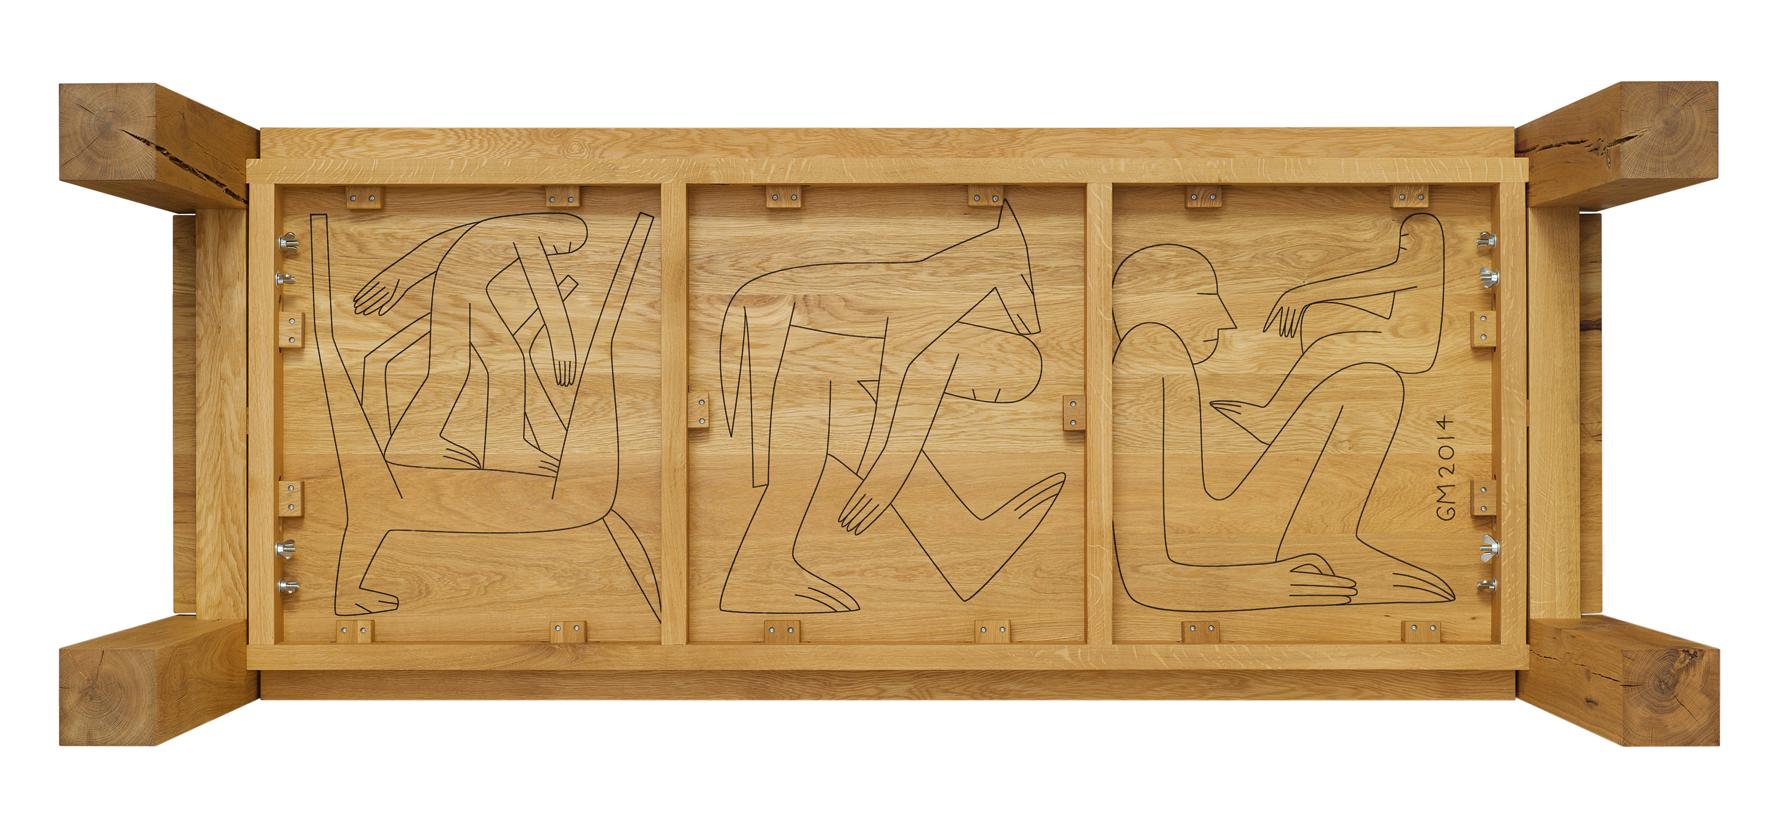 Artist and illustrator Geoff McFetridge creates a limited edition BIGFOOT with laser etched figures covering the underside of the table. The artwork focuses on the table's patron, the creature Bigfoot believed to inhabit forests, mainly in the